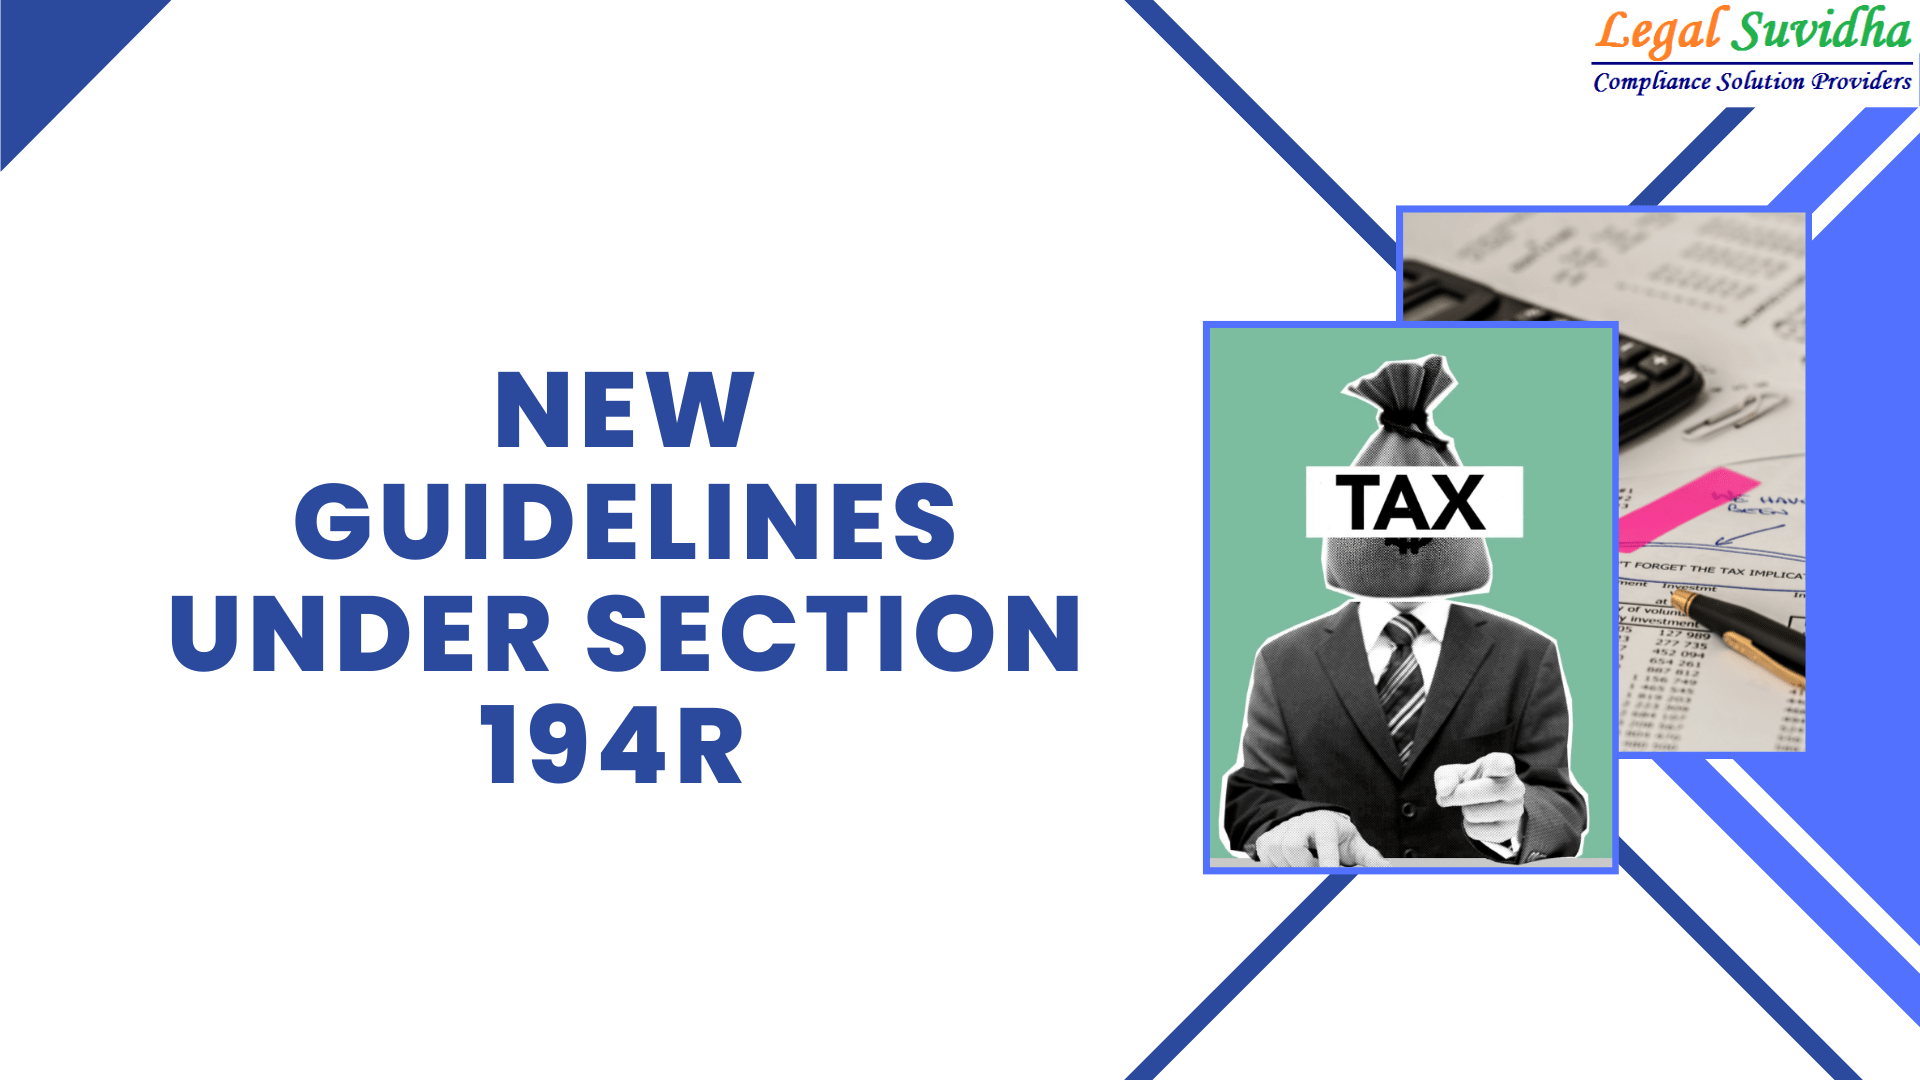 New Guidelines under Section 194R